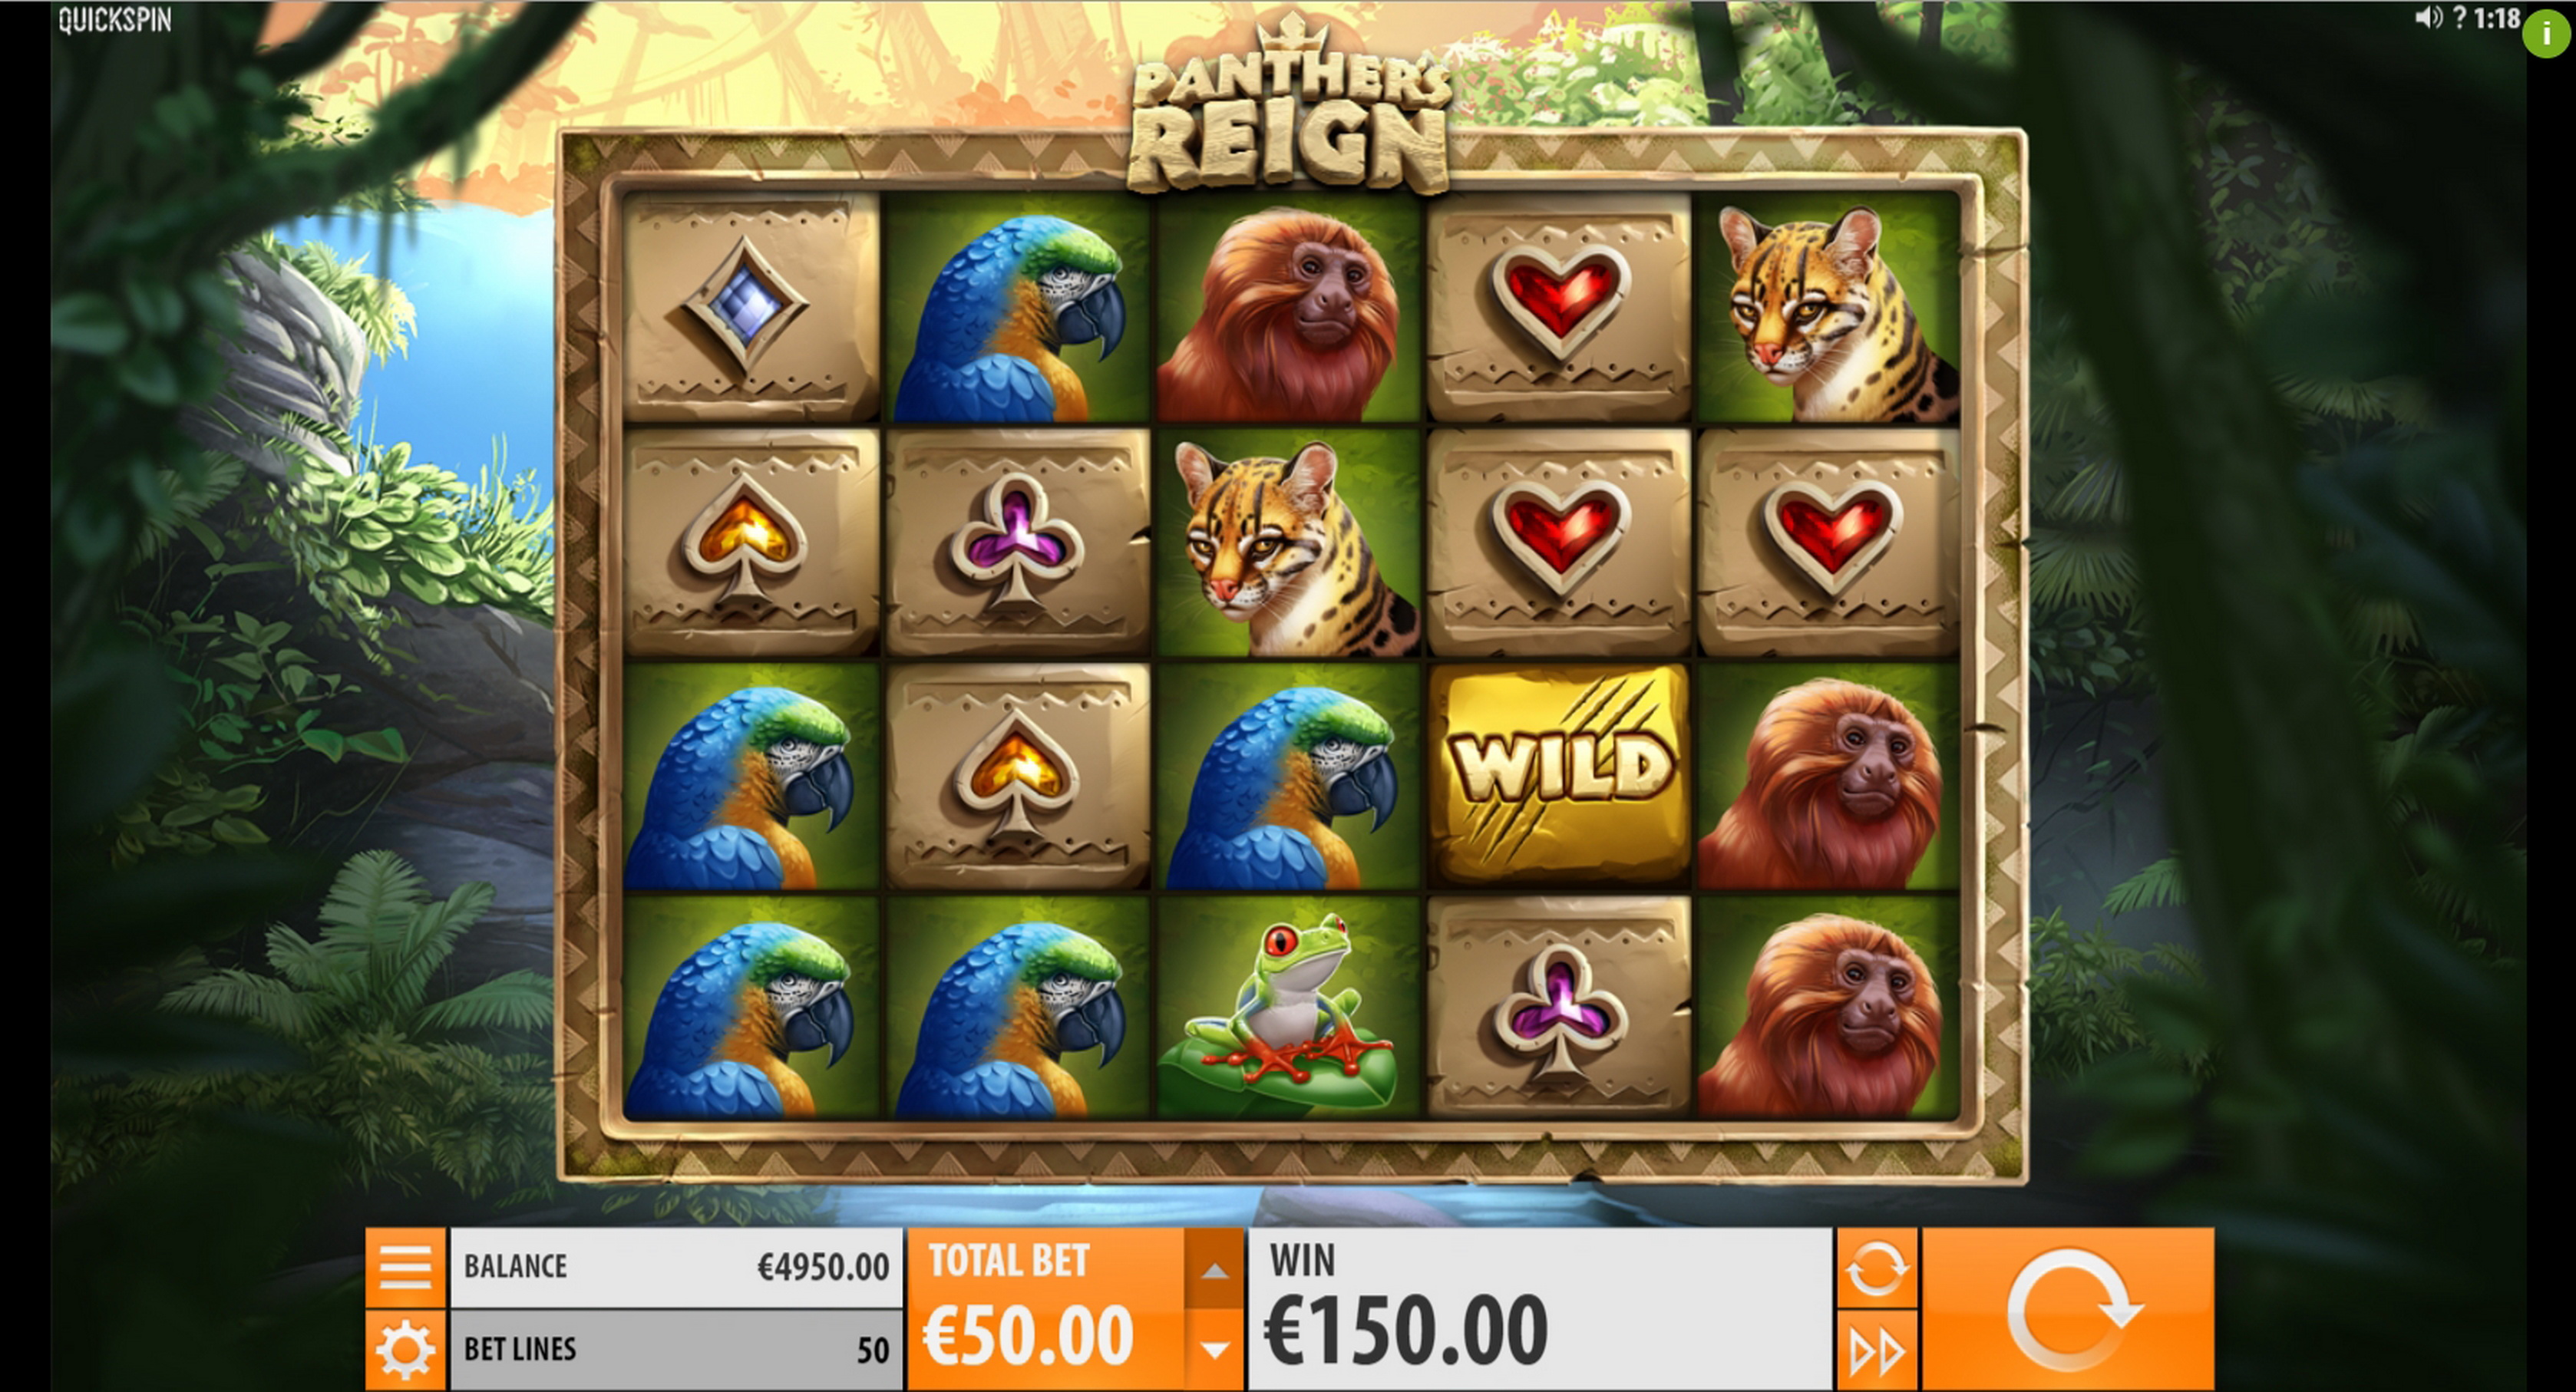 Win Money in Panthers Reign Free Slot Game by Quickspin